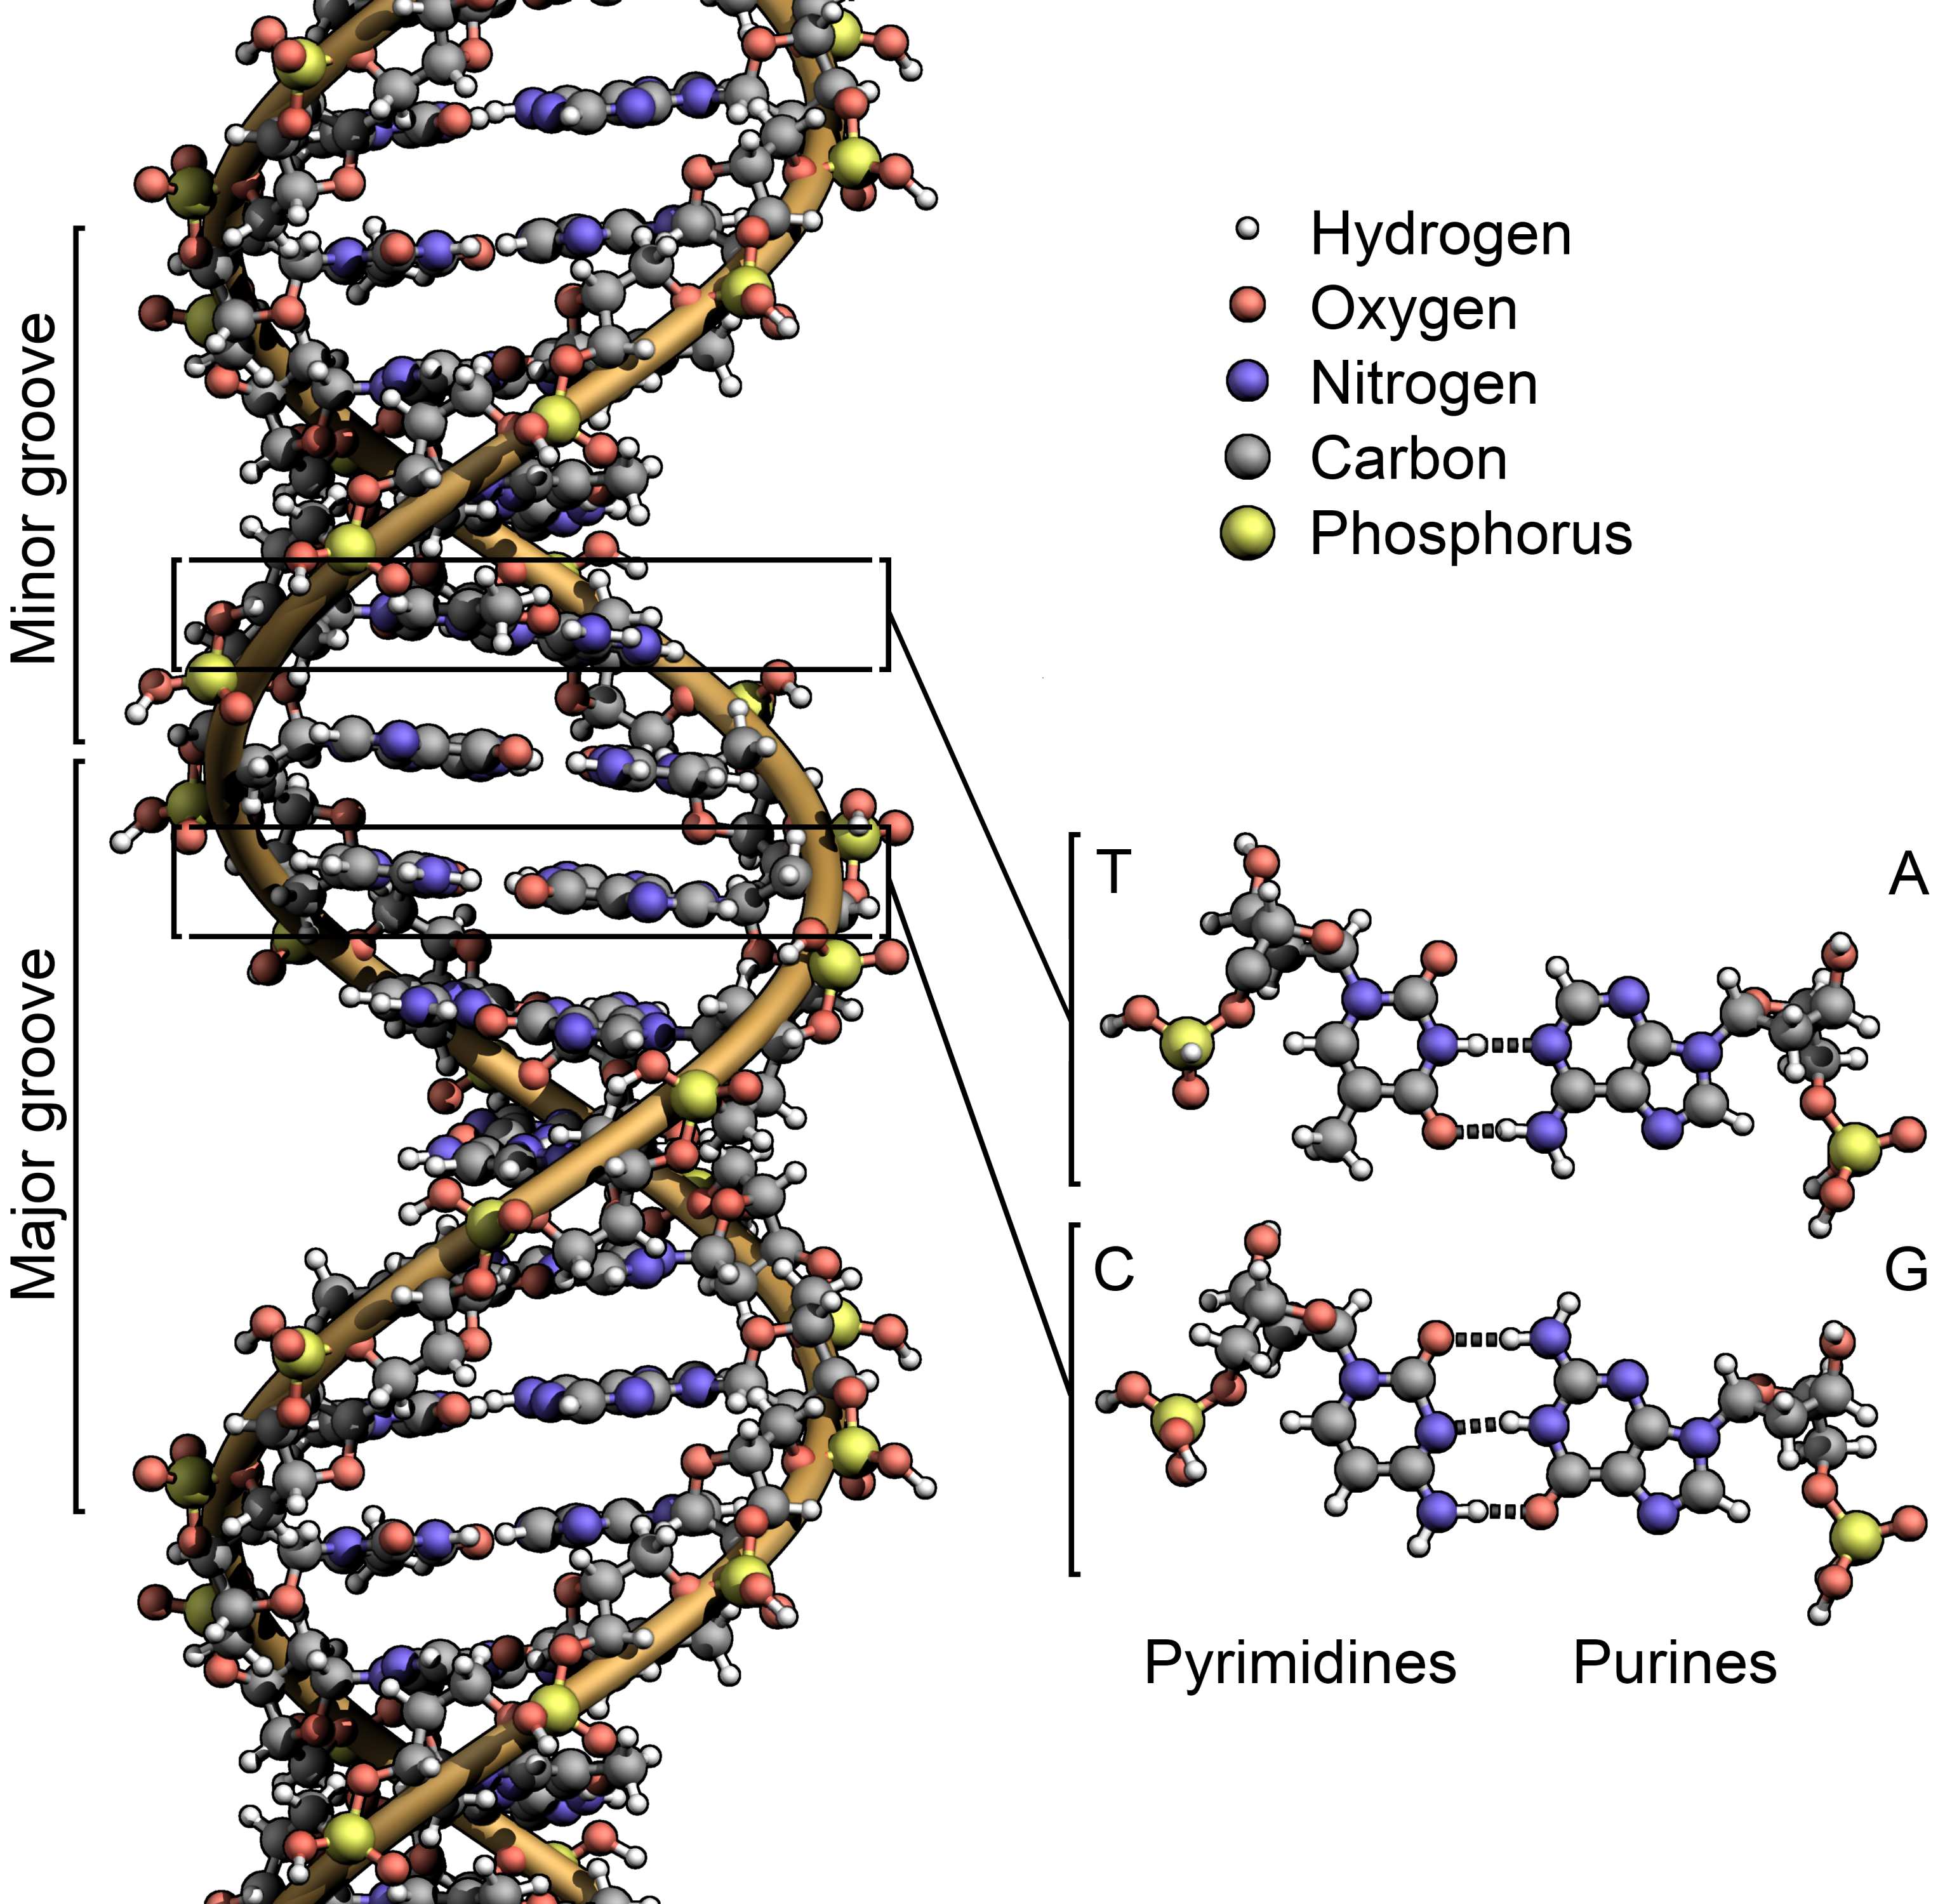 <p>• Store of genetic information.</p><p>• Double helix has complementary polynucleotide chains, forming minor and major grooves</p><p>• ‘DNA makes RNA makes protein’</p><p>• Cellular DNA is supercoiled in vivo</p><p>• DNA damage is detected and repaired.</p>